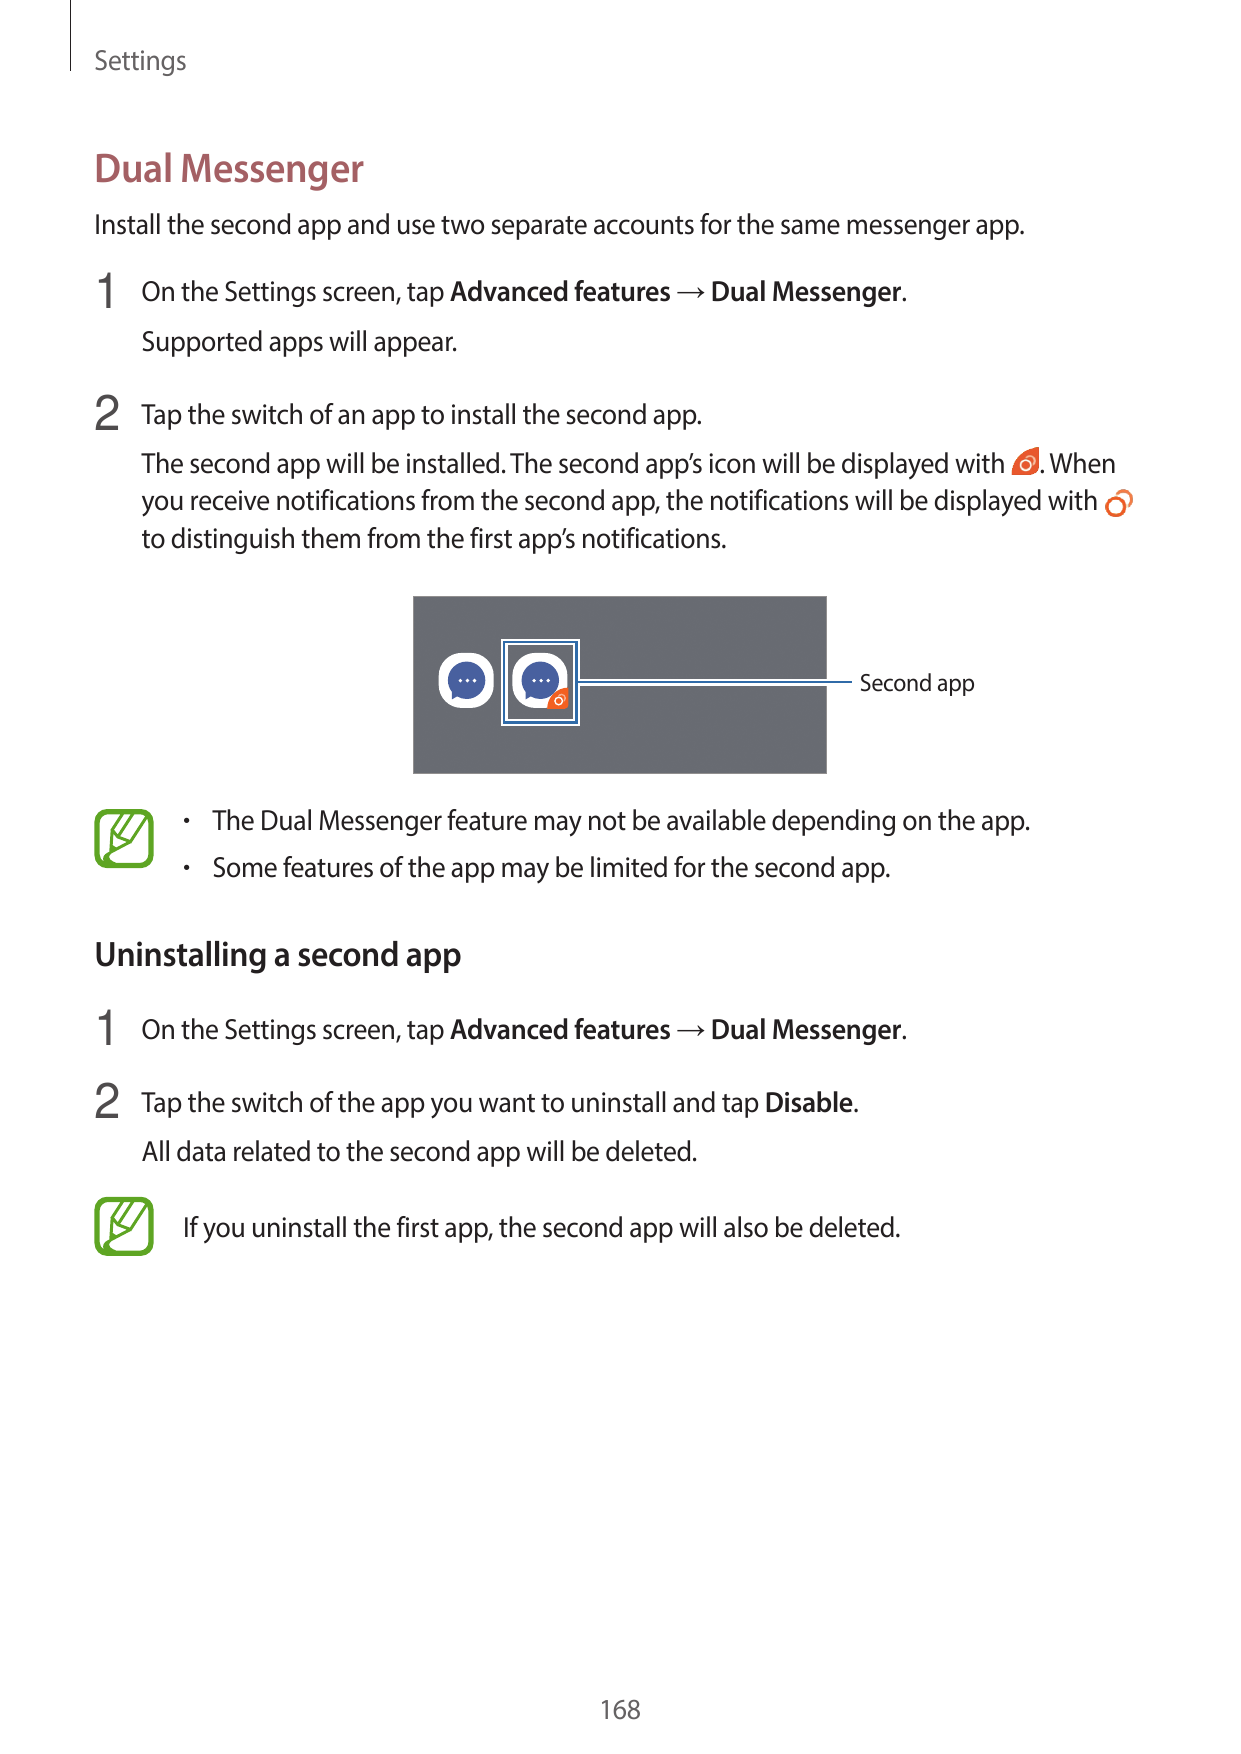 SettingsDual MessengerInstall the second app and use two separate accounts for the same messenger app.1 On the Settings screen, 